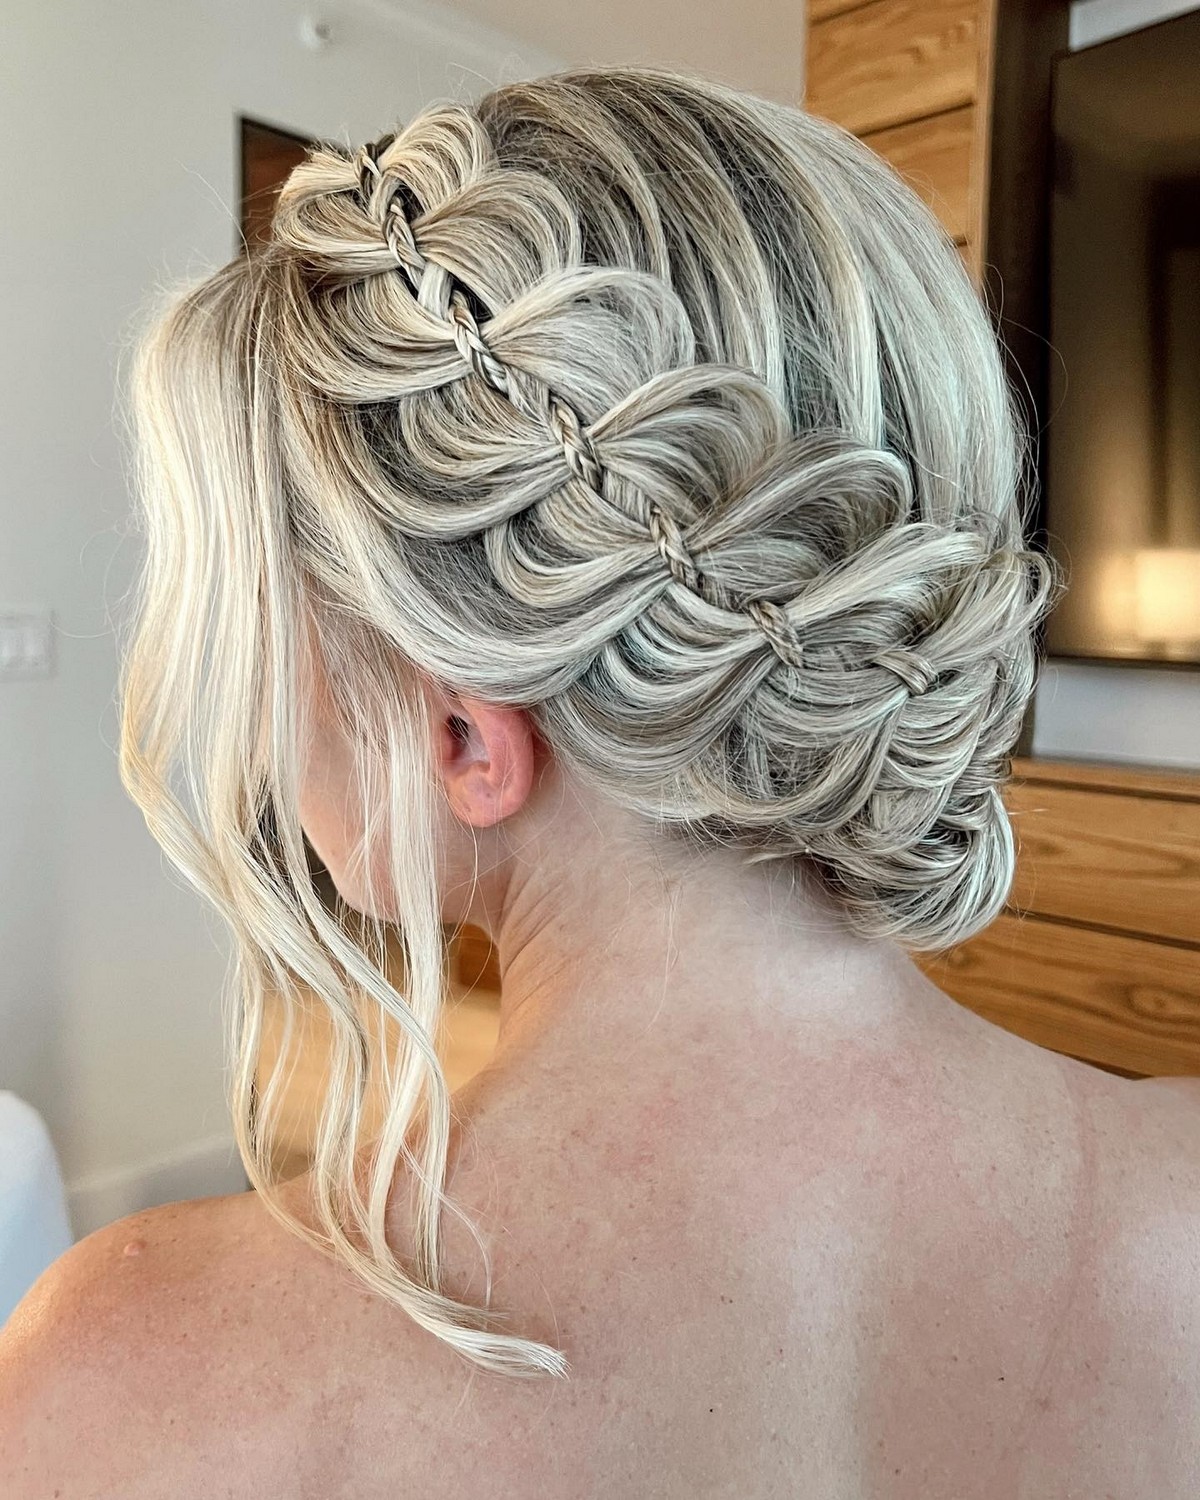 Stunning Lacing With A Boho Updo Braid